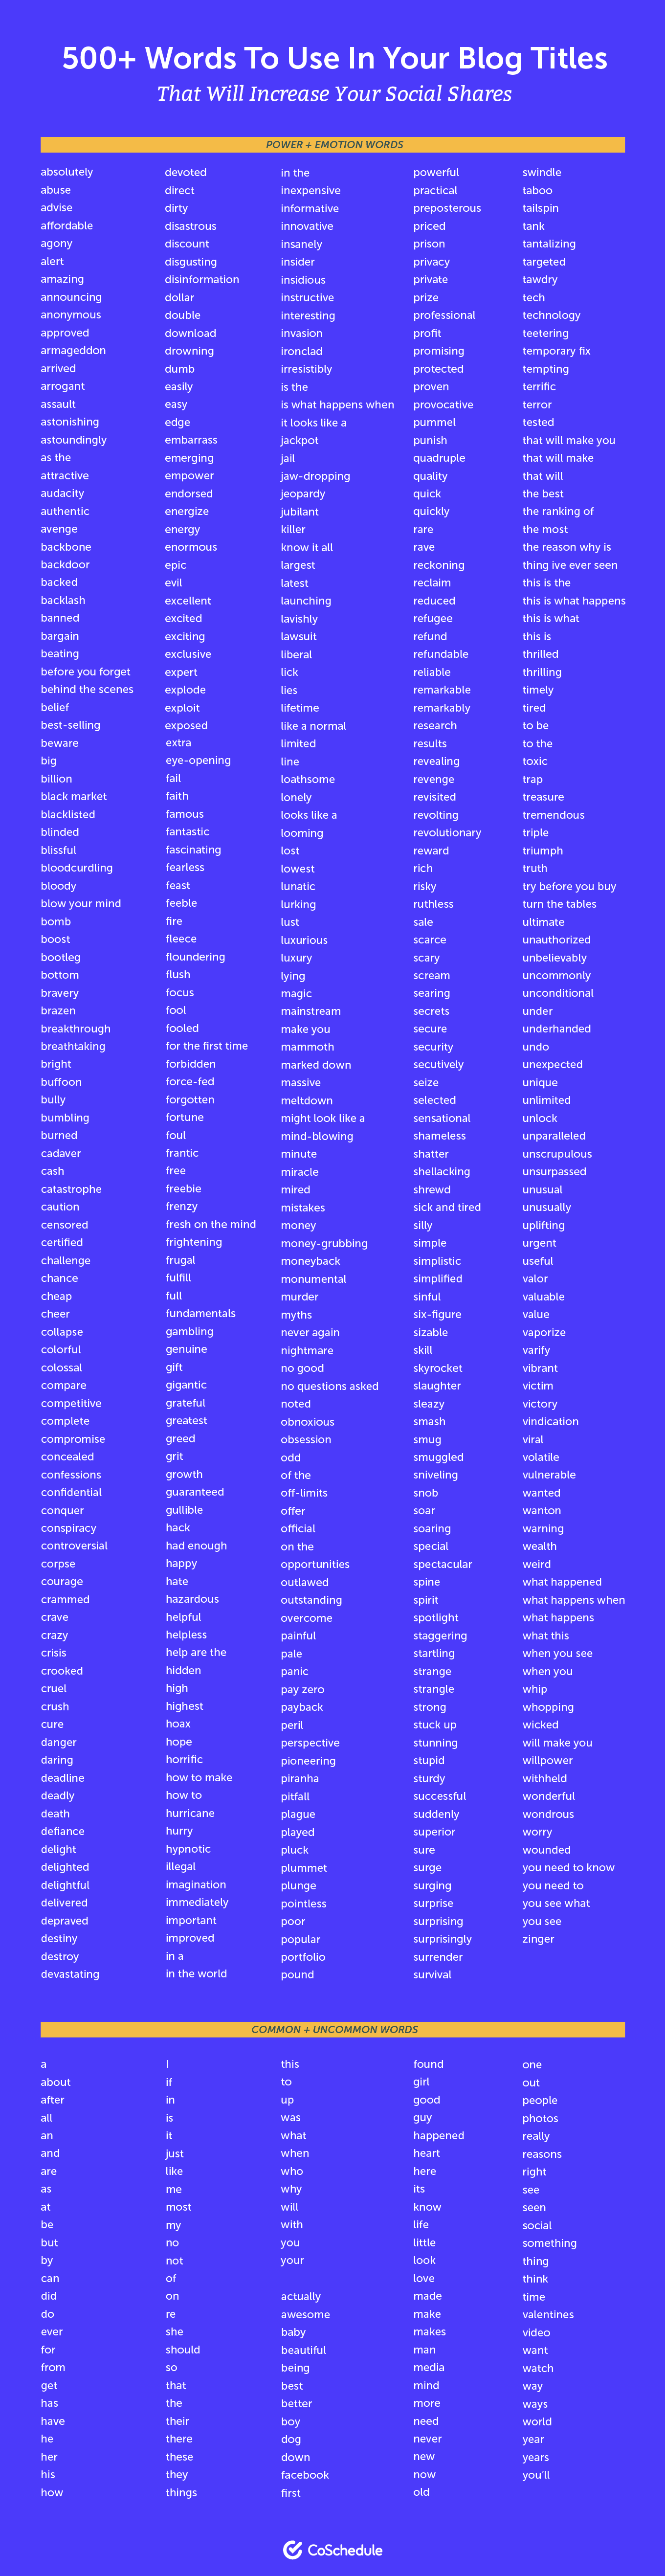 500+ words to use in blog titles